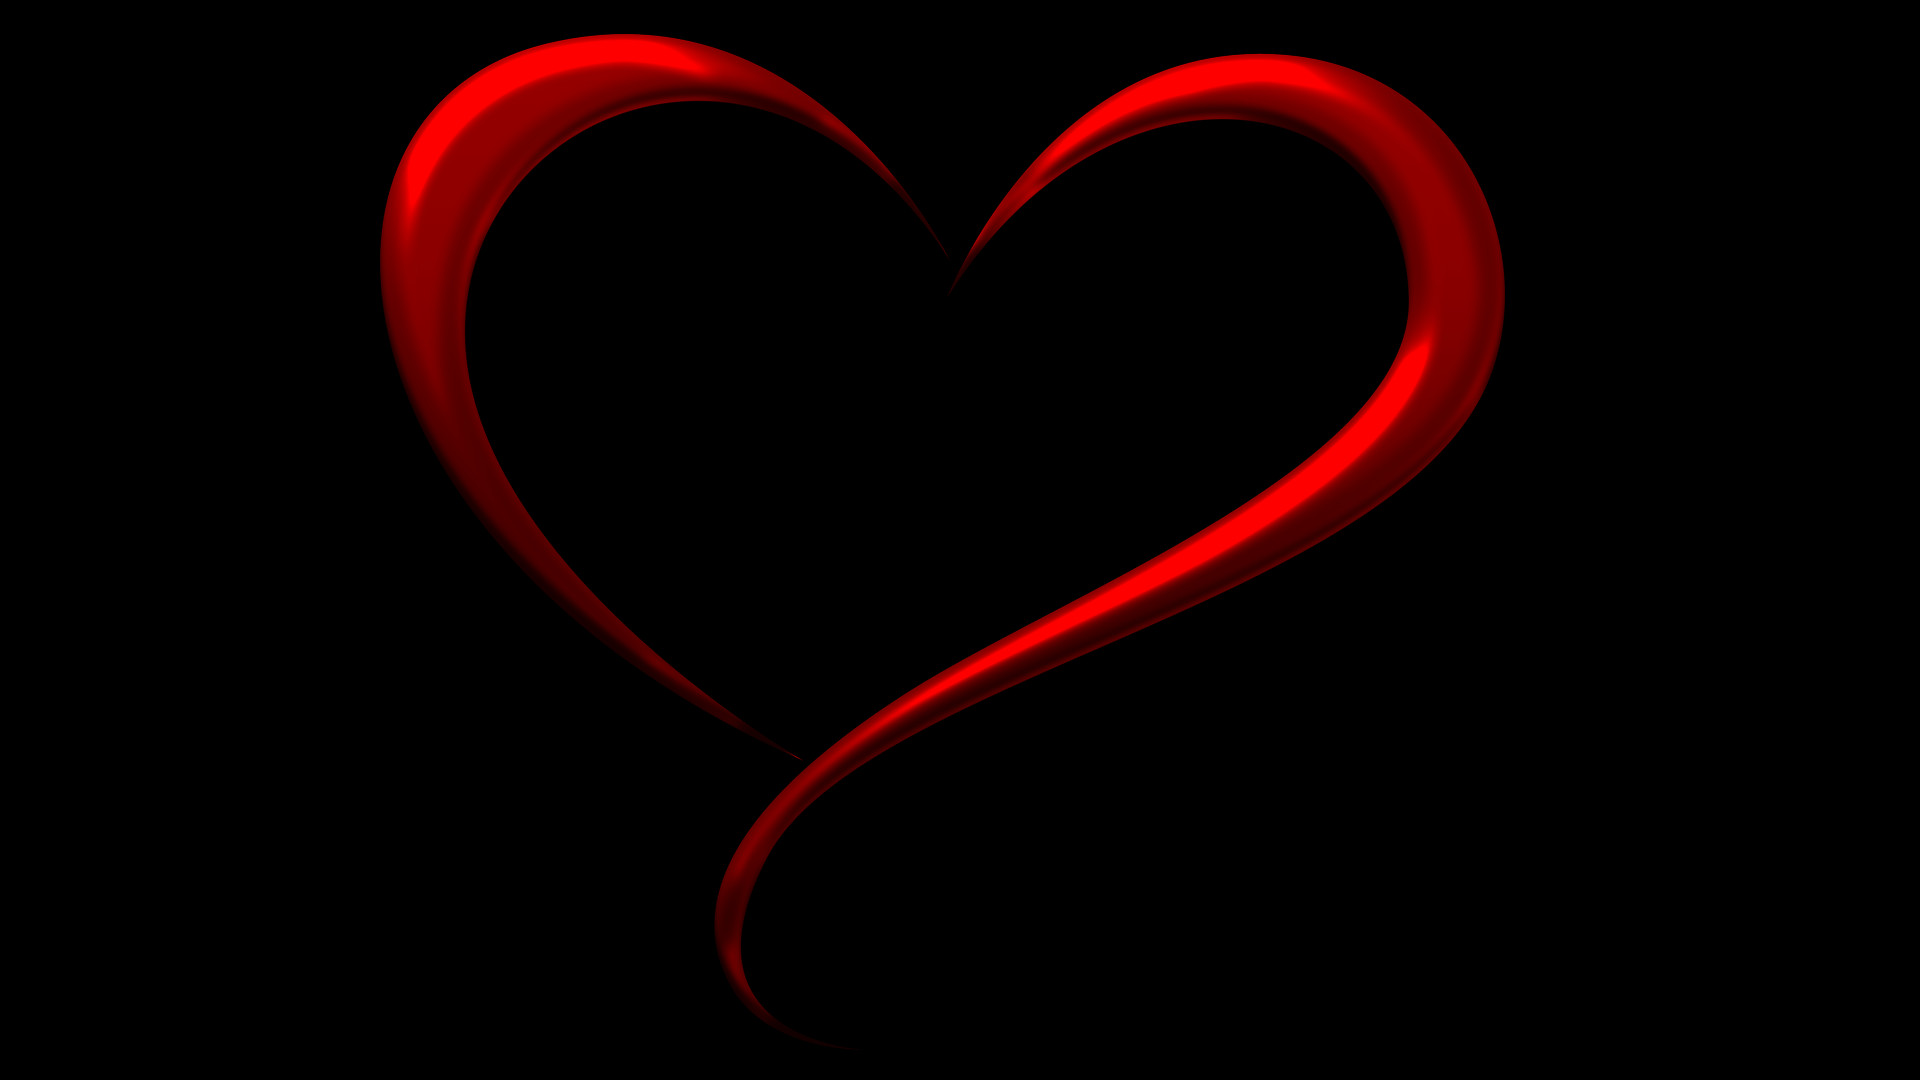 digital animation of red heart stock footage video (100 on red heart with black background